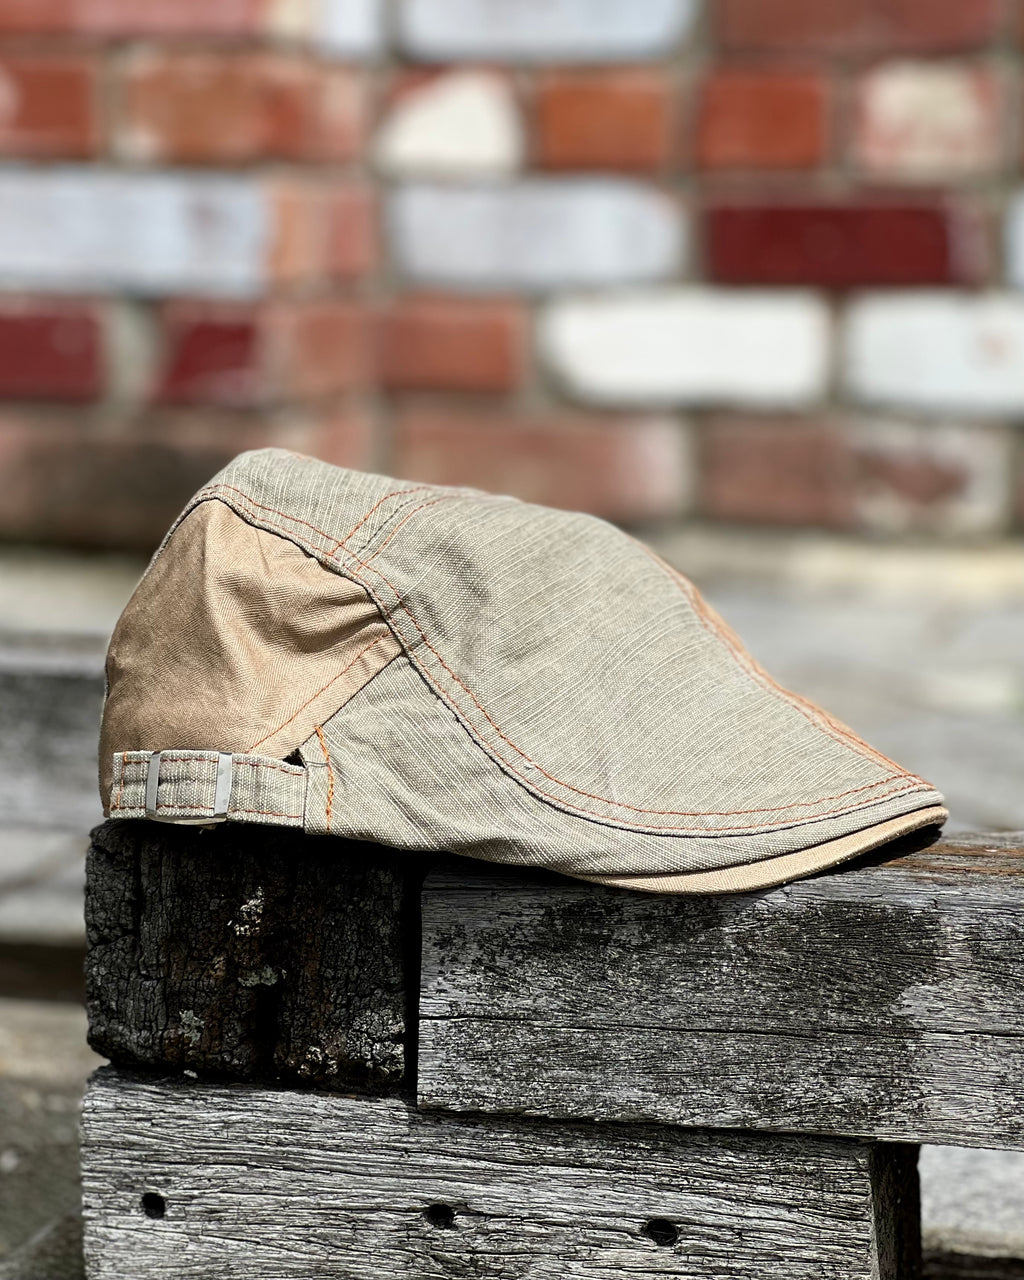 Retro style cheese cutter cap in light brown with patch stitching